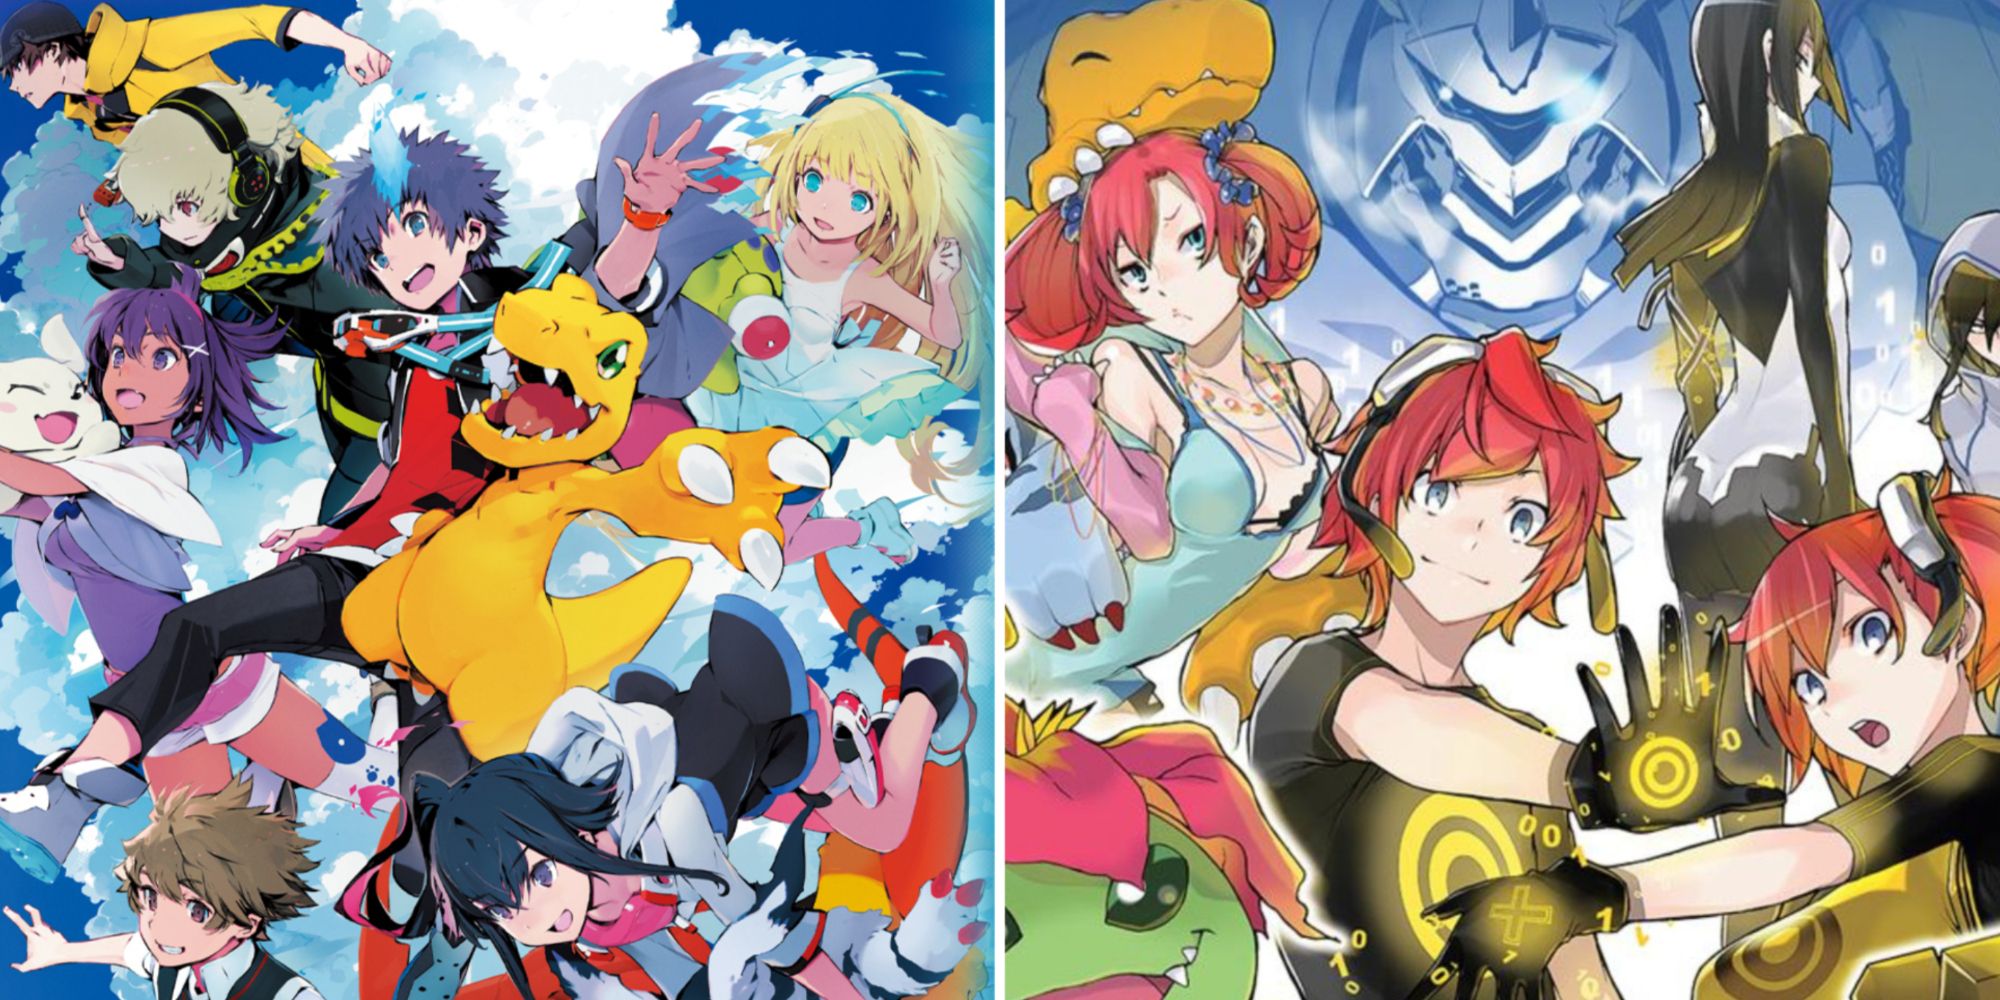 A collage featuring the promotional art work of Digimon World: Next Order and Digimon Story: Cyber Sleuth.